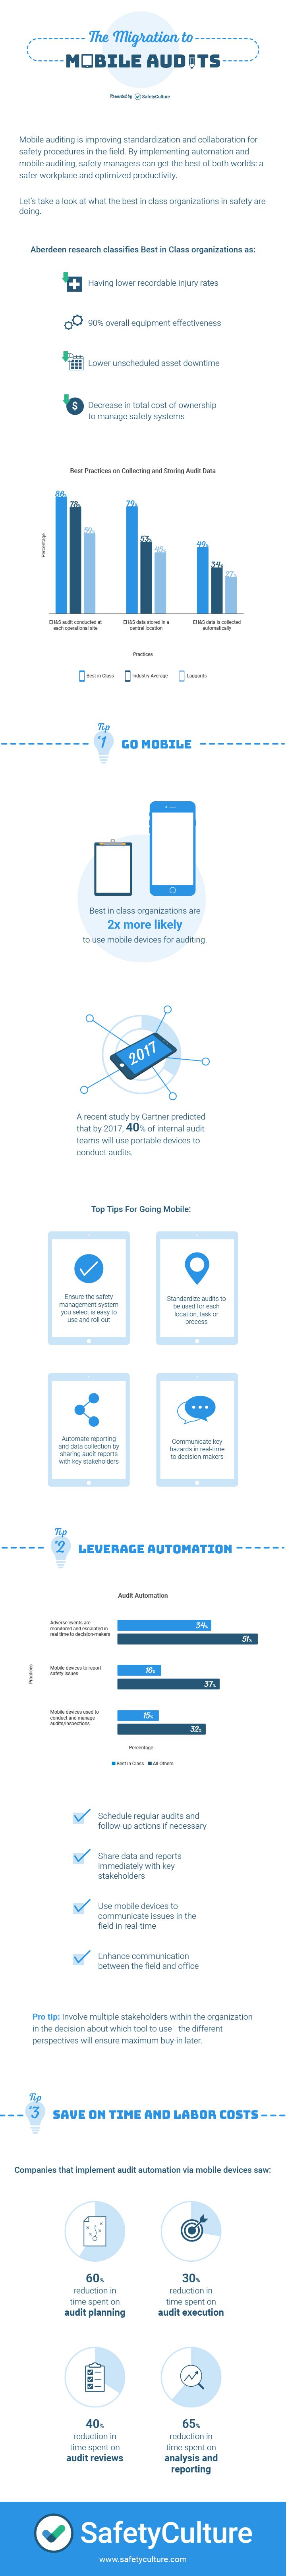 the_migration_to_mobile_audits_infographic_mobile-1